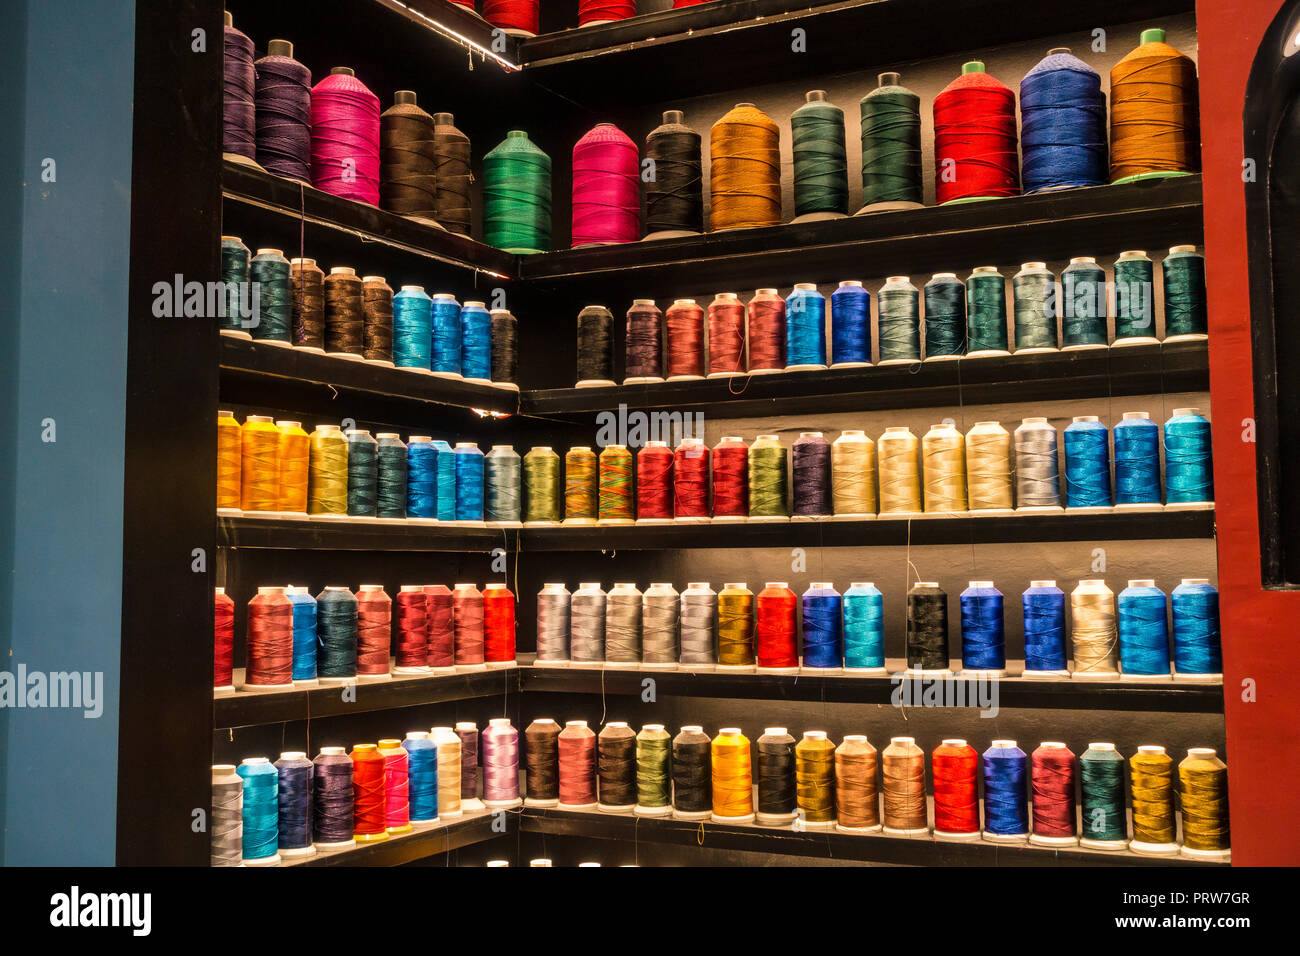 Spools of colorful threads on shelves Stock Photo